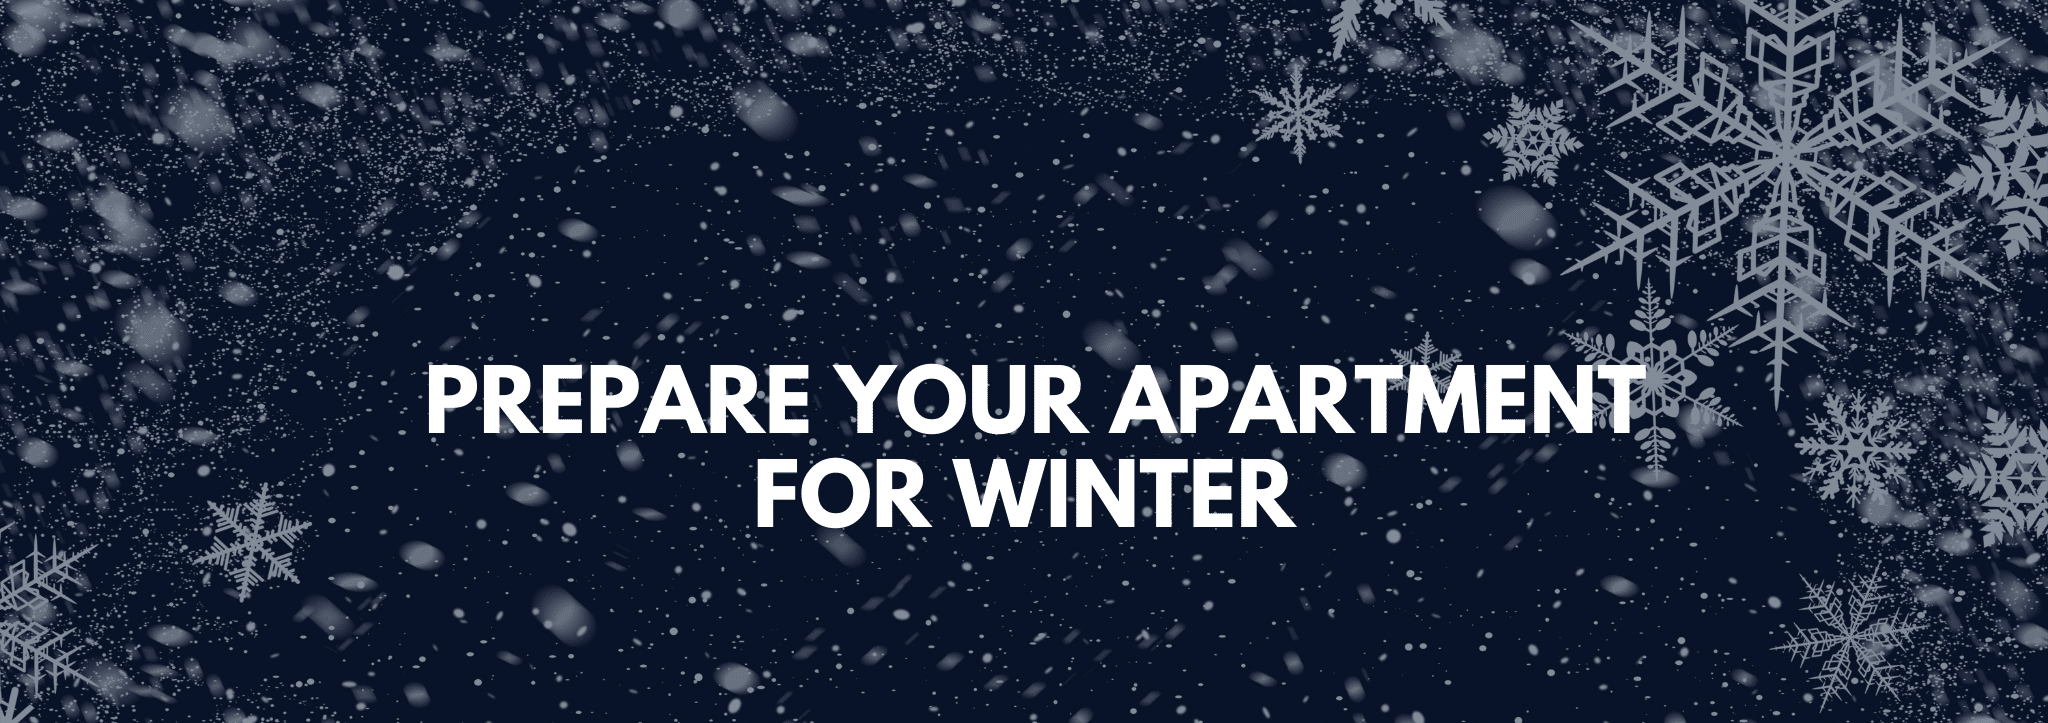 10 Ways to Prepare Your Apartment for Winter - Venterra Living